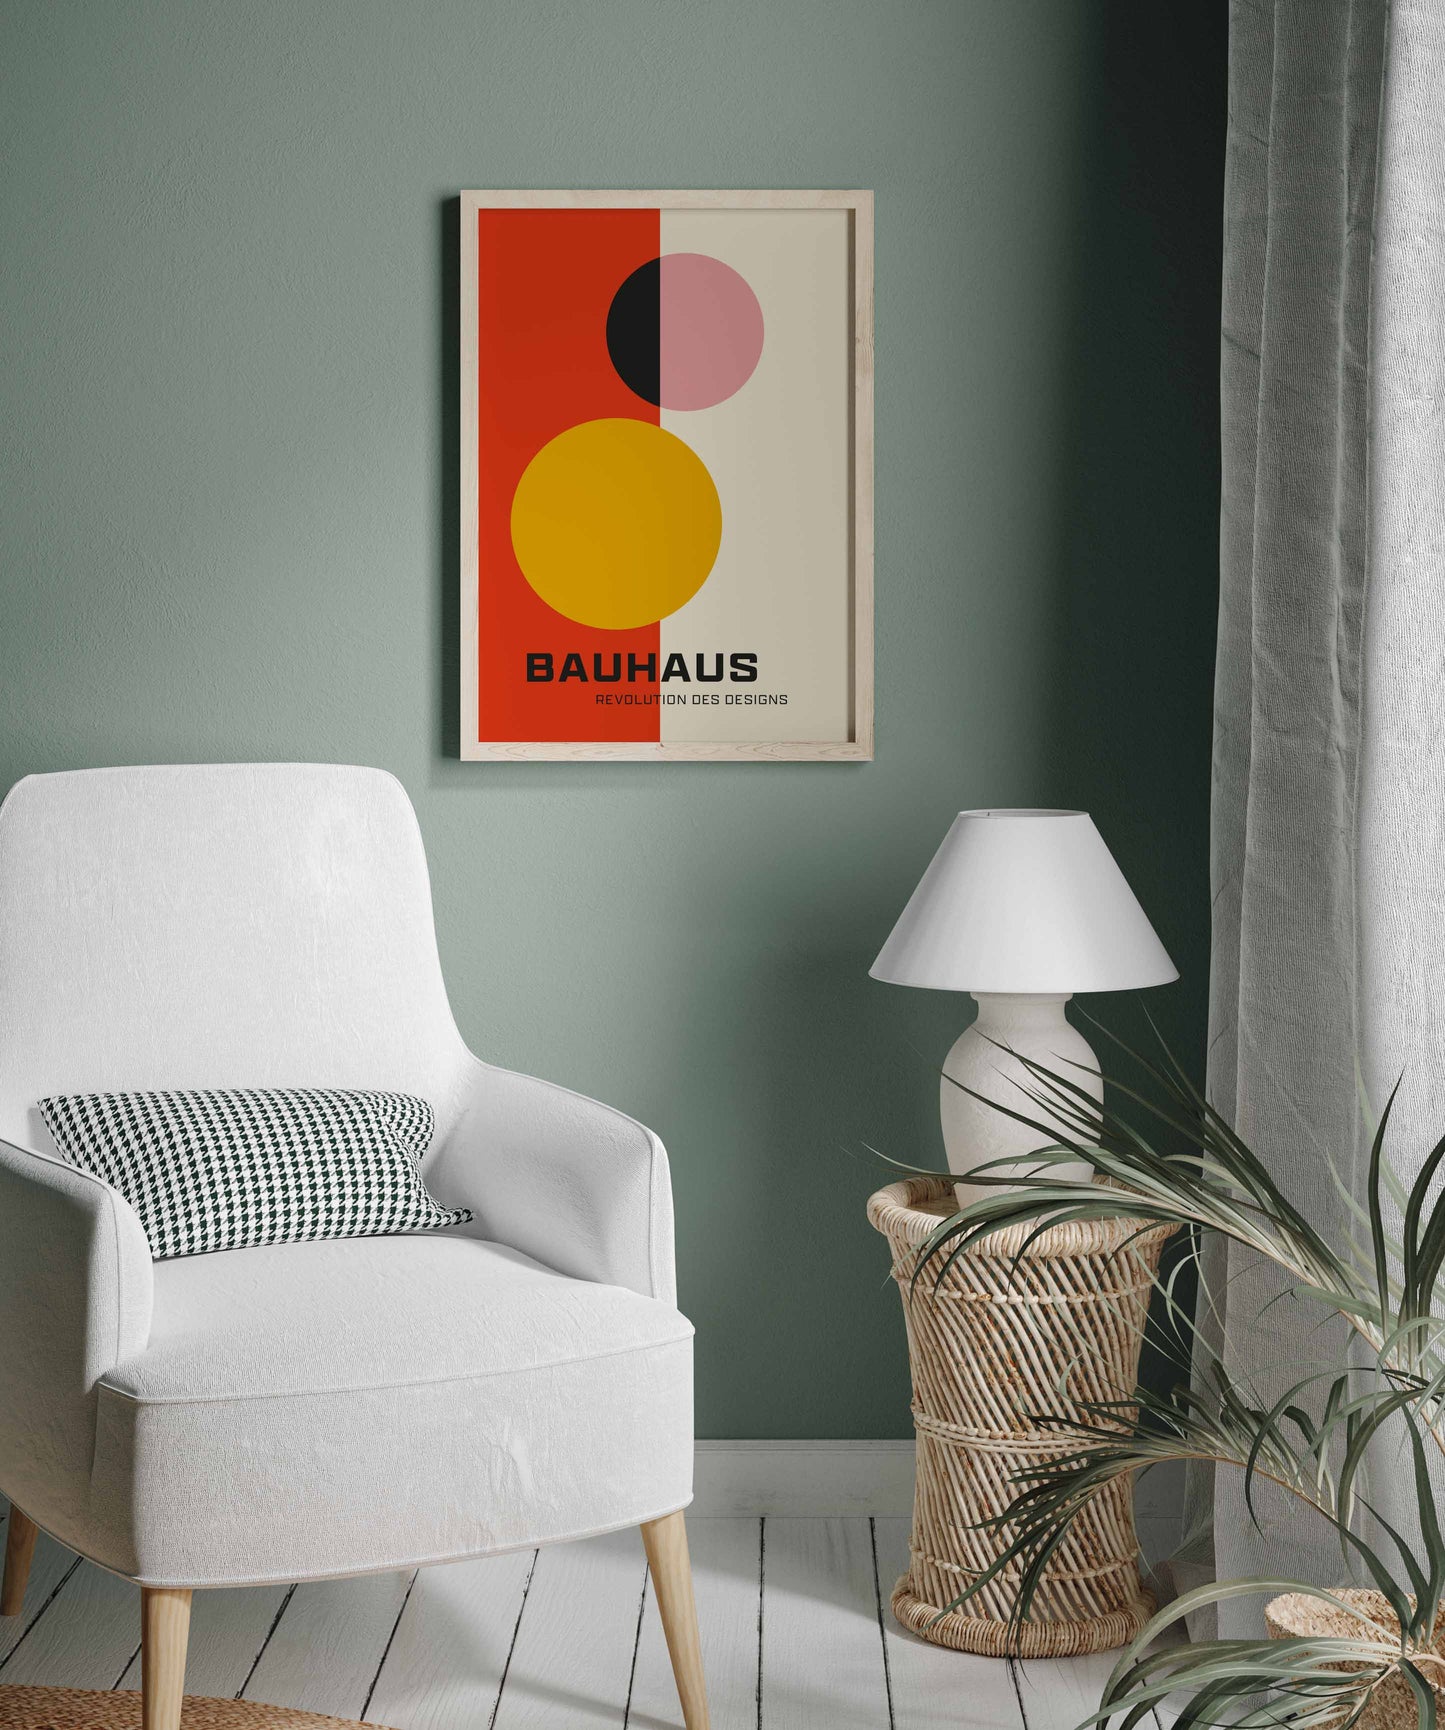 Bauhaus Art Print in Red, Yellow and Pink